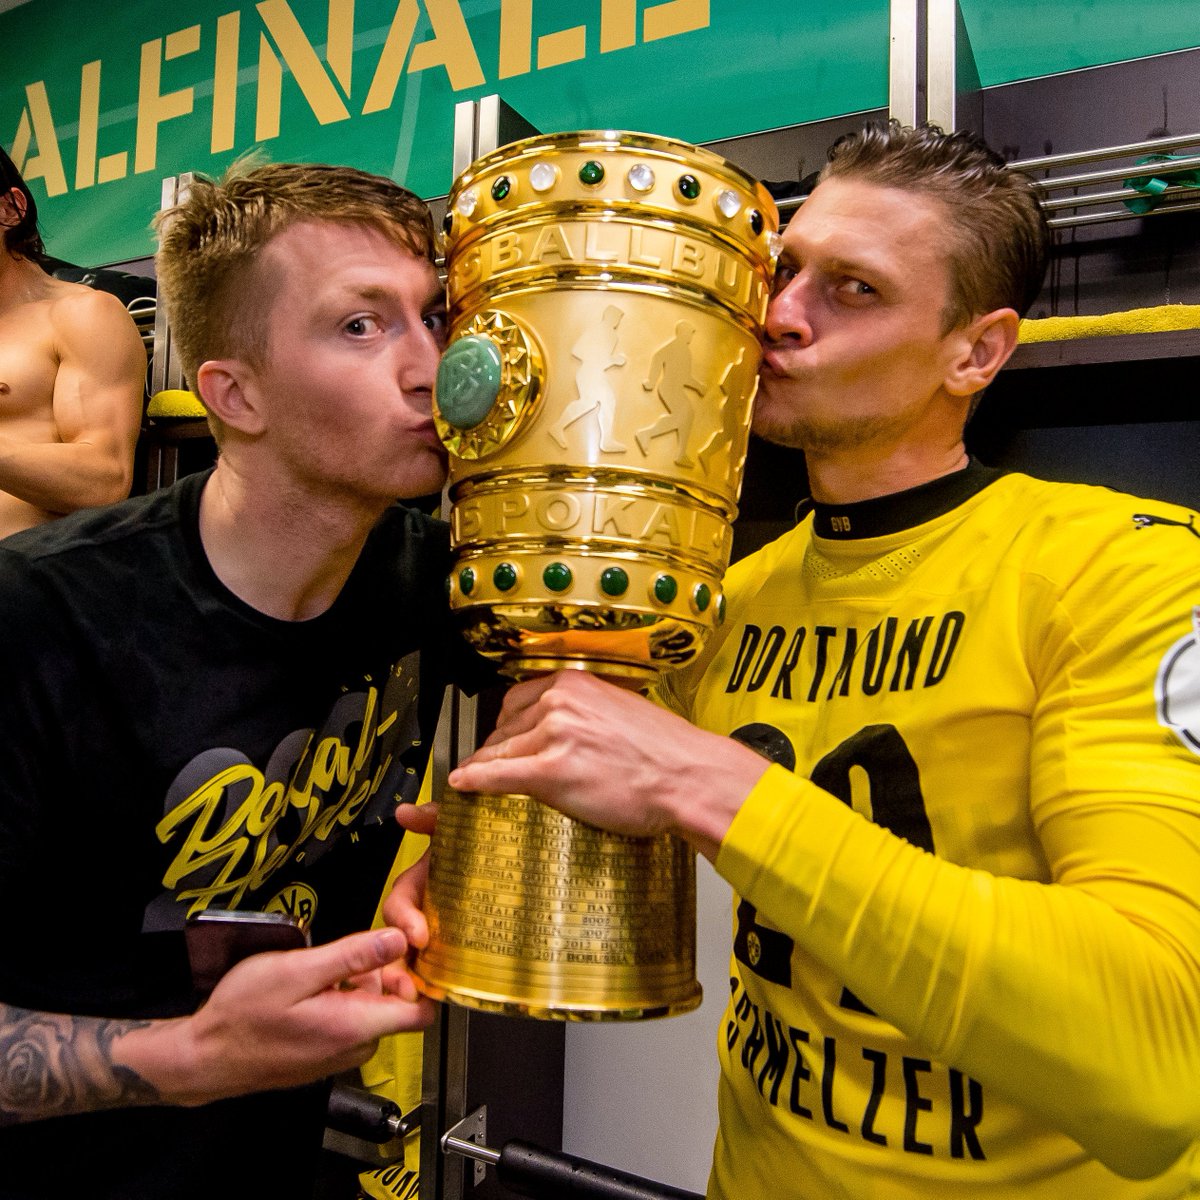 Lukasz Piszczek on Marco Reus: 'For me personally, Marco is one of the best players I have ever played with. He has an incredible feel for the ball, he is a superb technician, and he has an exceptional instinct on the pitch. Off the pitch, I always got along well with Marco